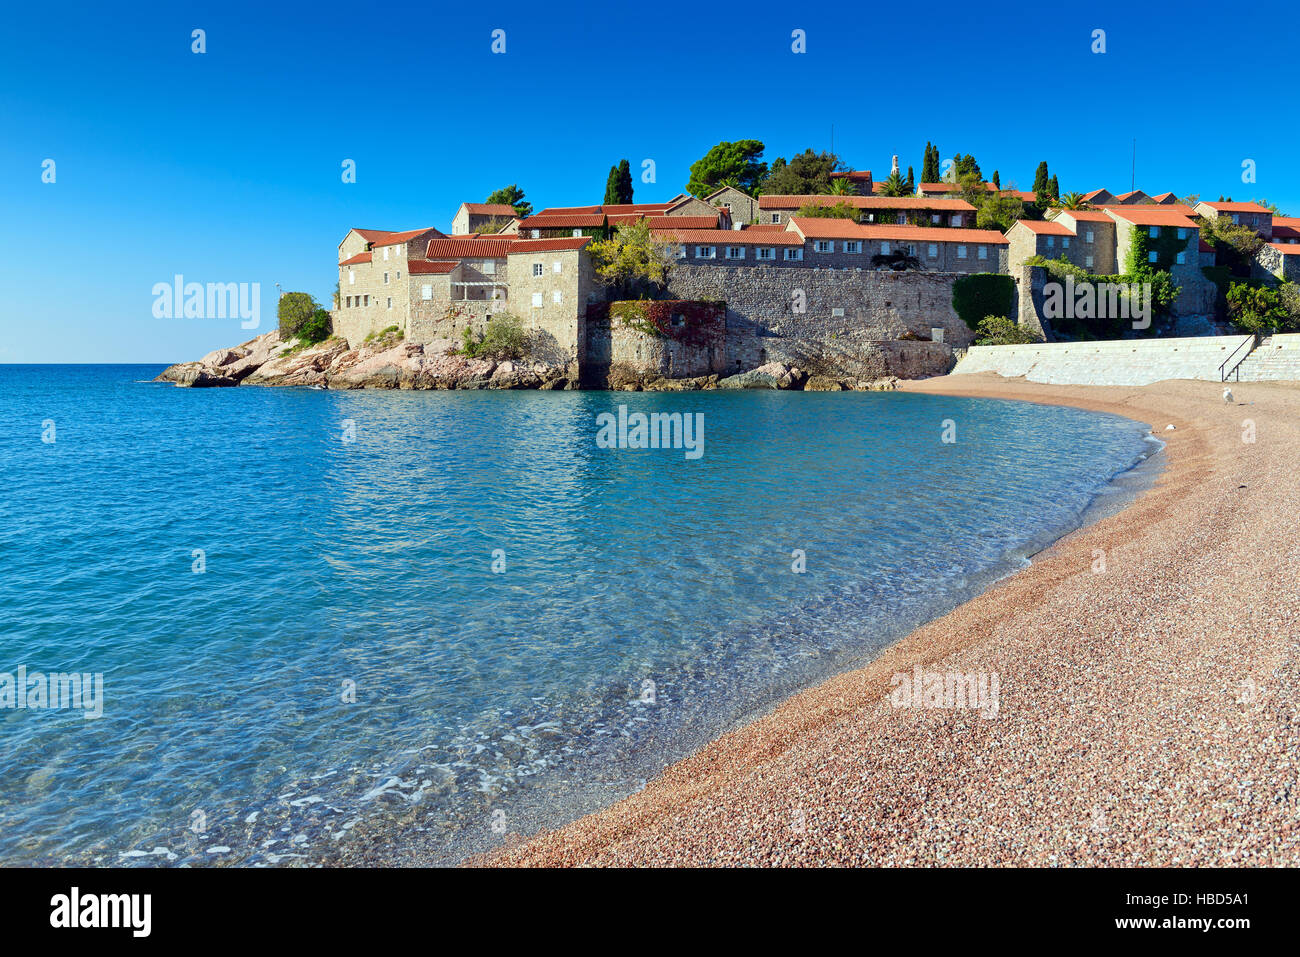 Sveti Stefan island  old  town castle,  view from beach. Montenegro, Europe Stock Photo